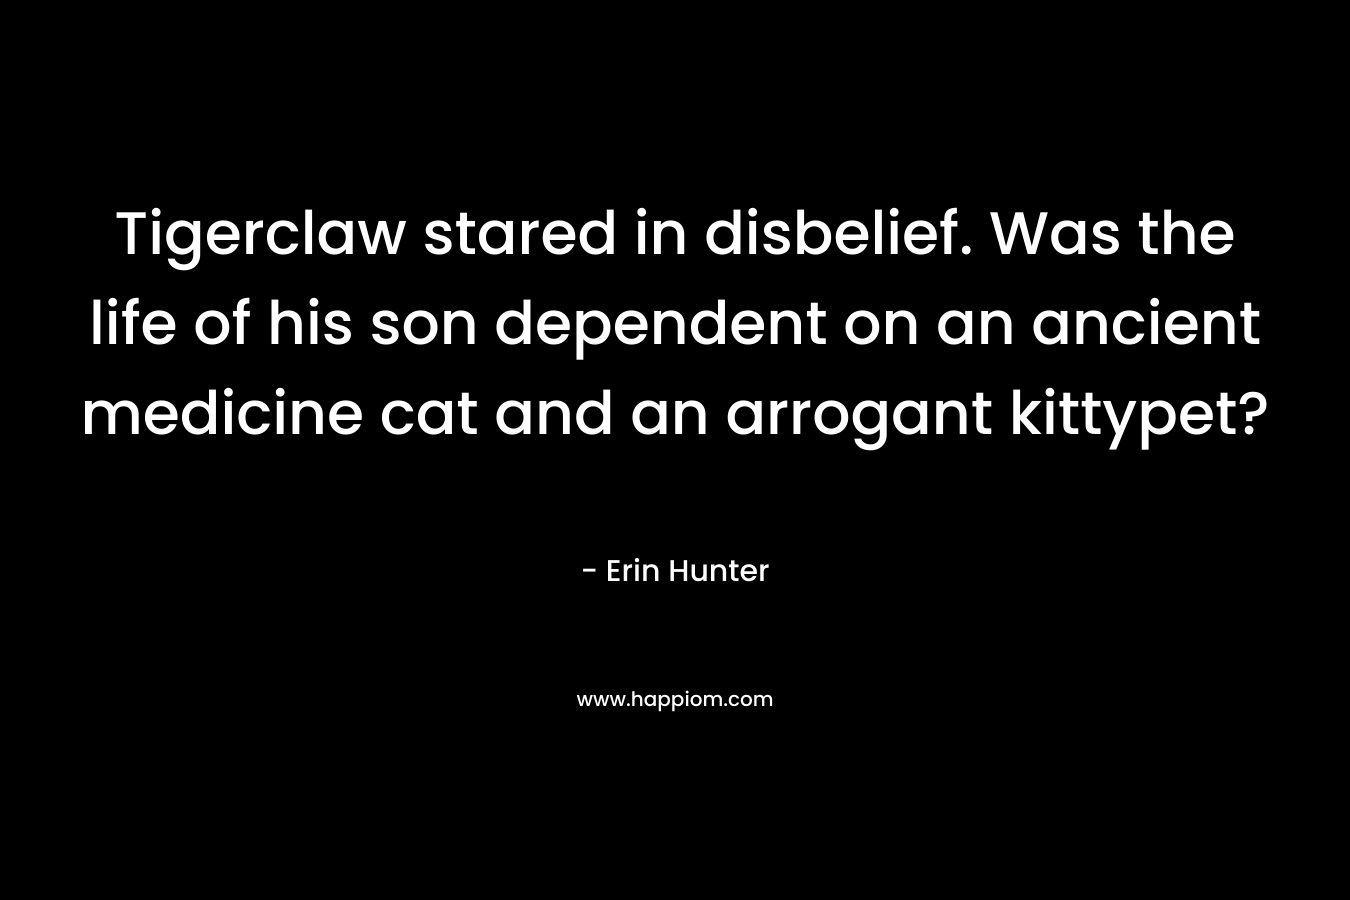 Tigerclaw stared in disbelief. Was the life of his son dependent on an ancient medicine cat and an arrogant kittypet? – Erin Hunter